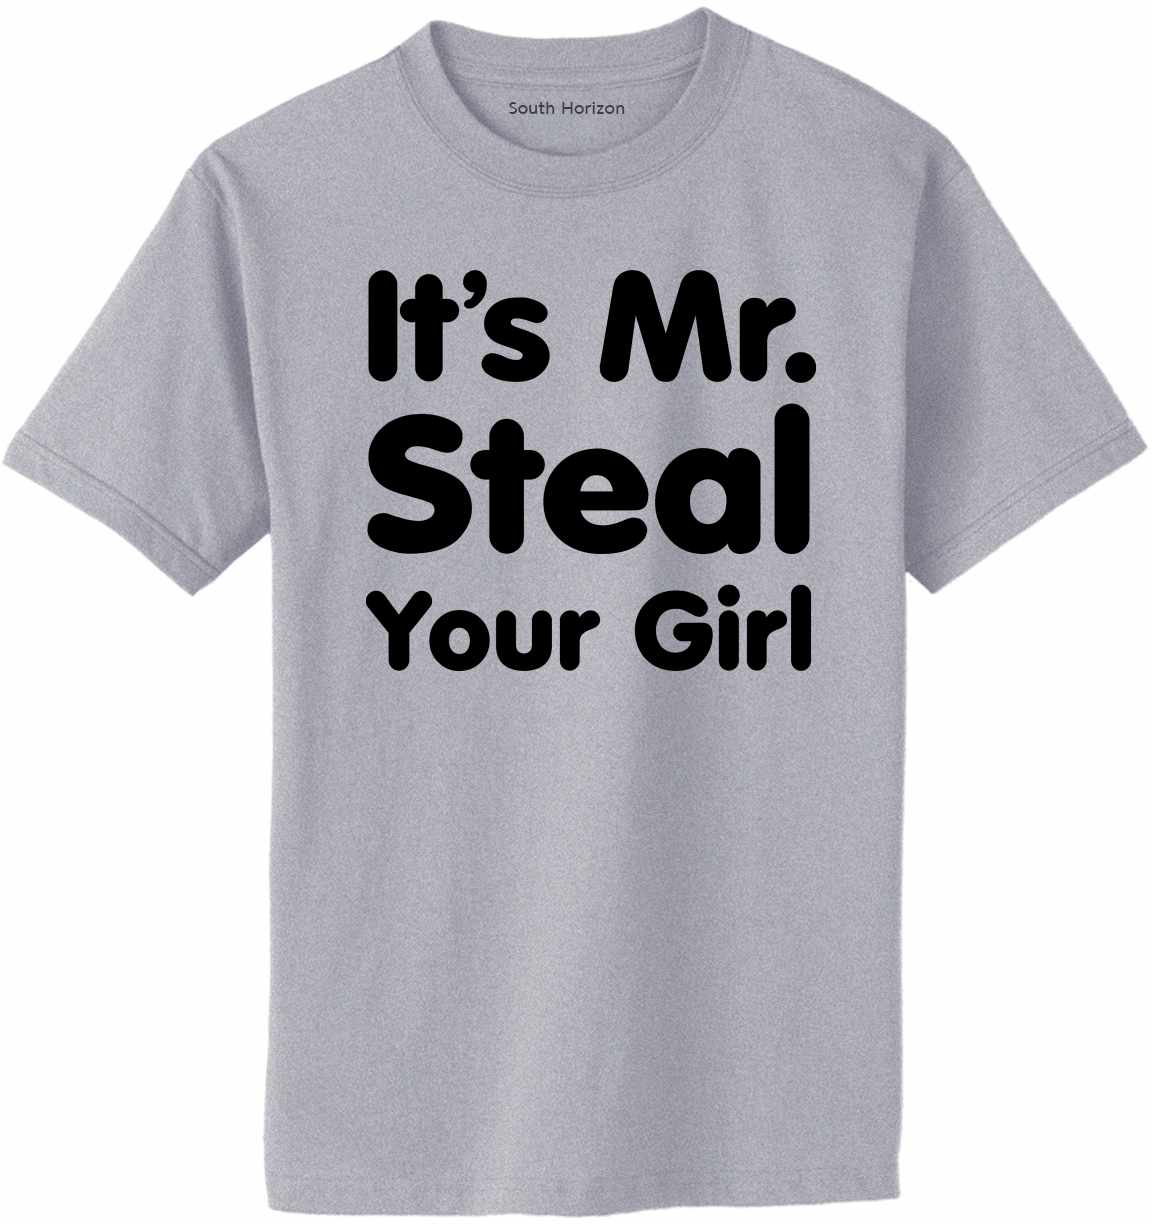 It's Mr. Steal Your Girl Adult T-Shirt (#905-1)